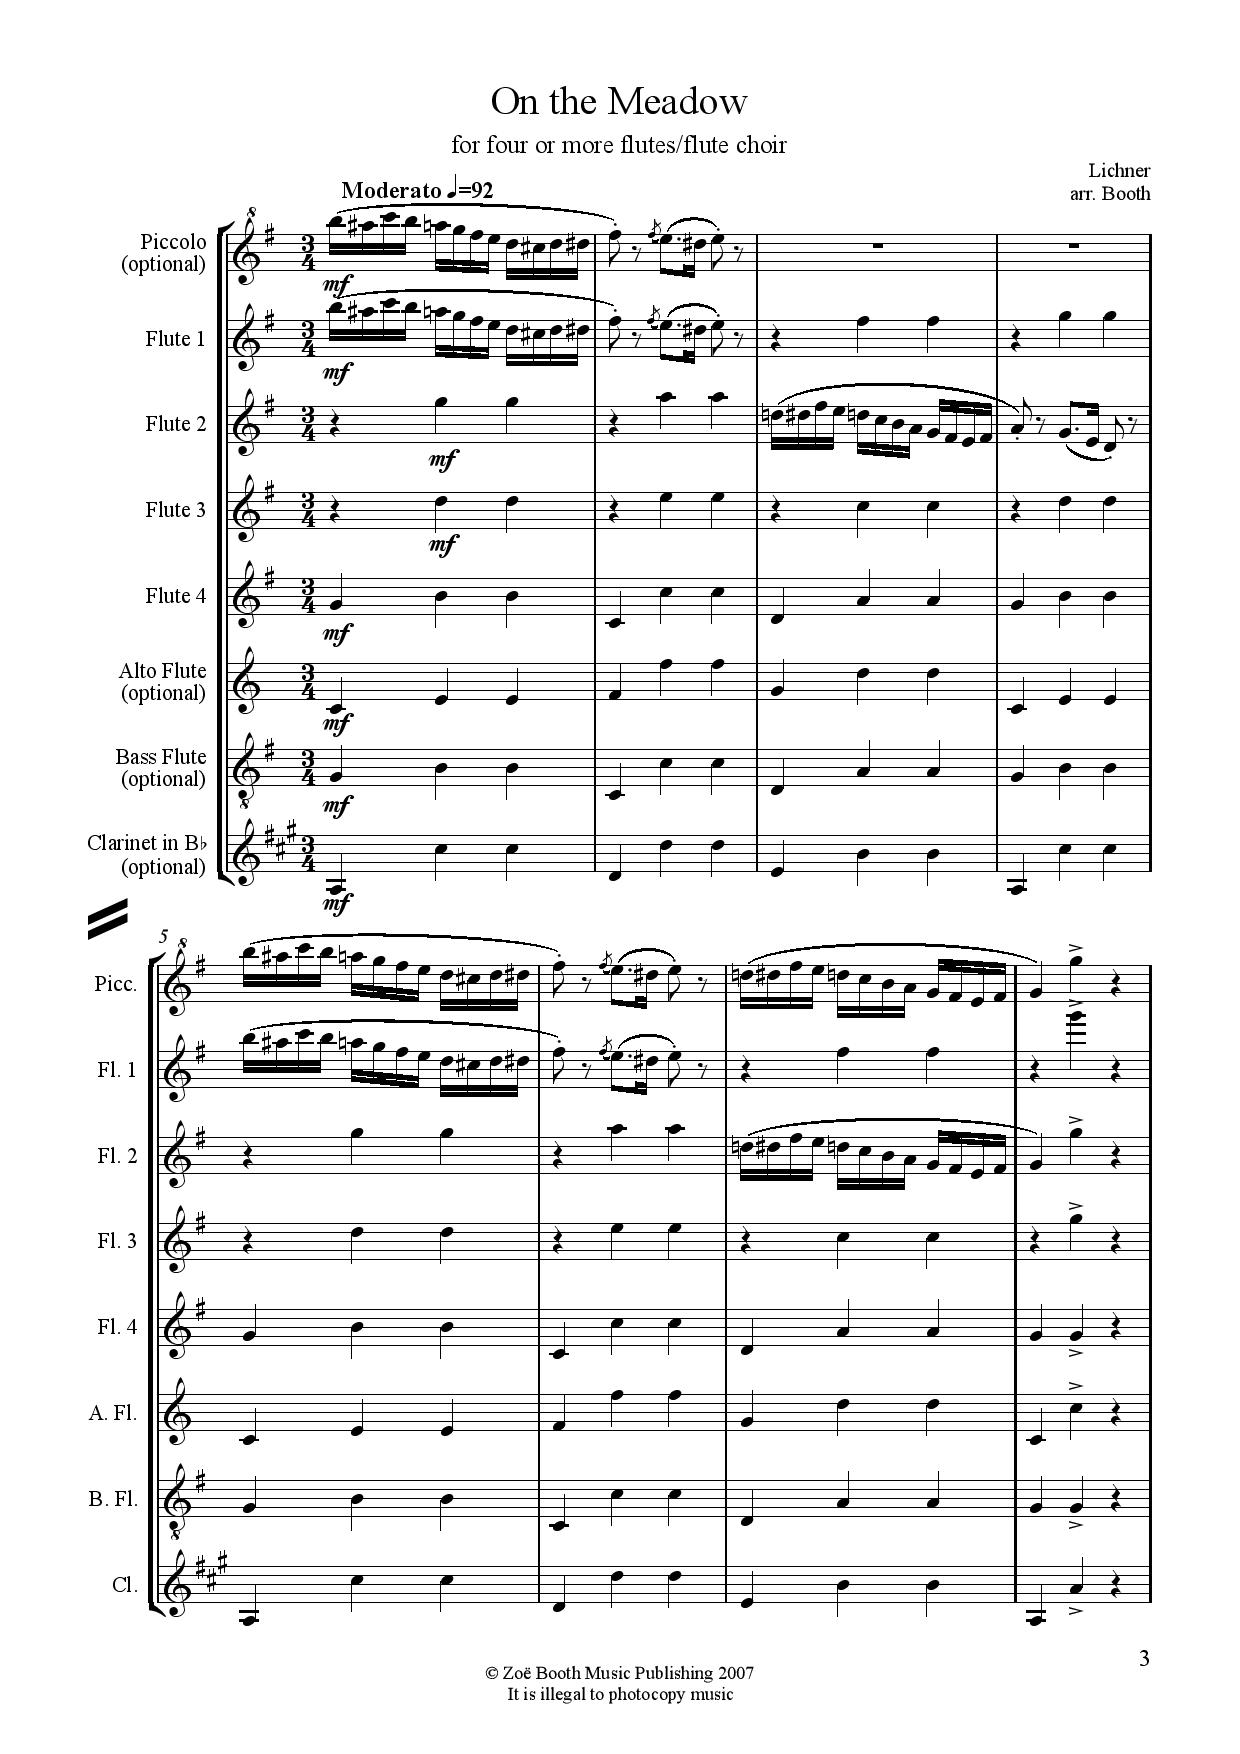 On the Meadow by Lichner,  arranged by Zoë Booth for four or more flutes/flute choir